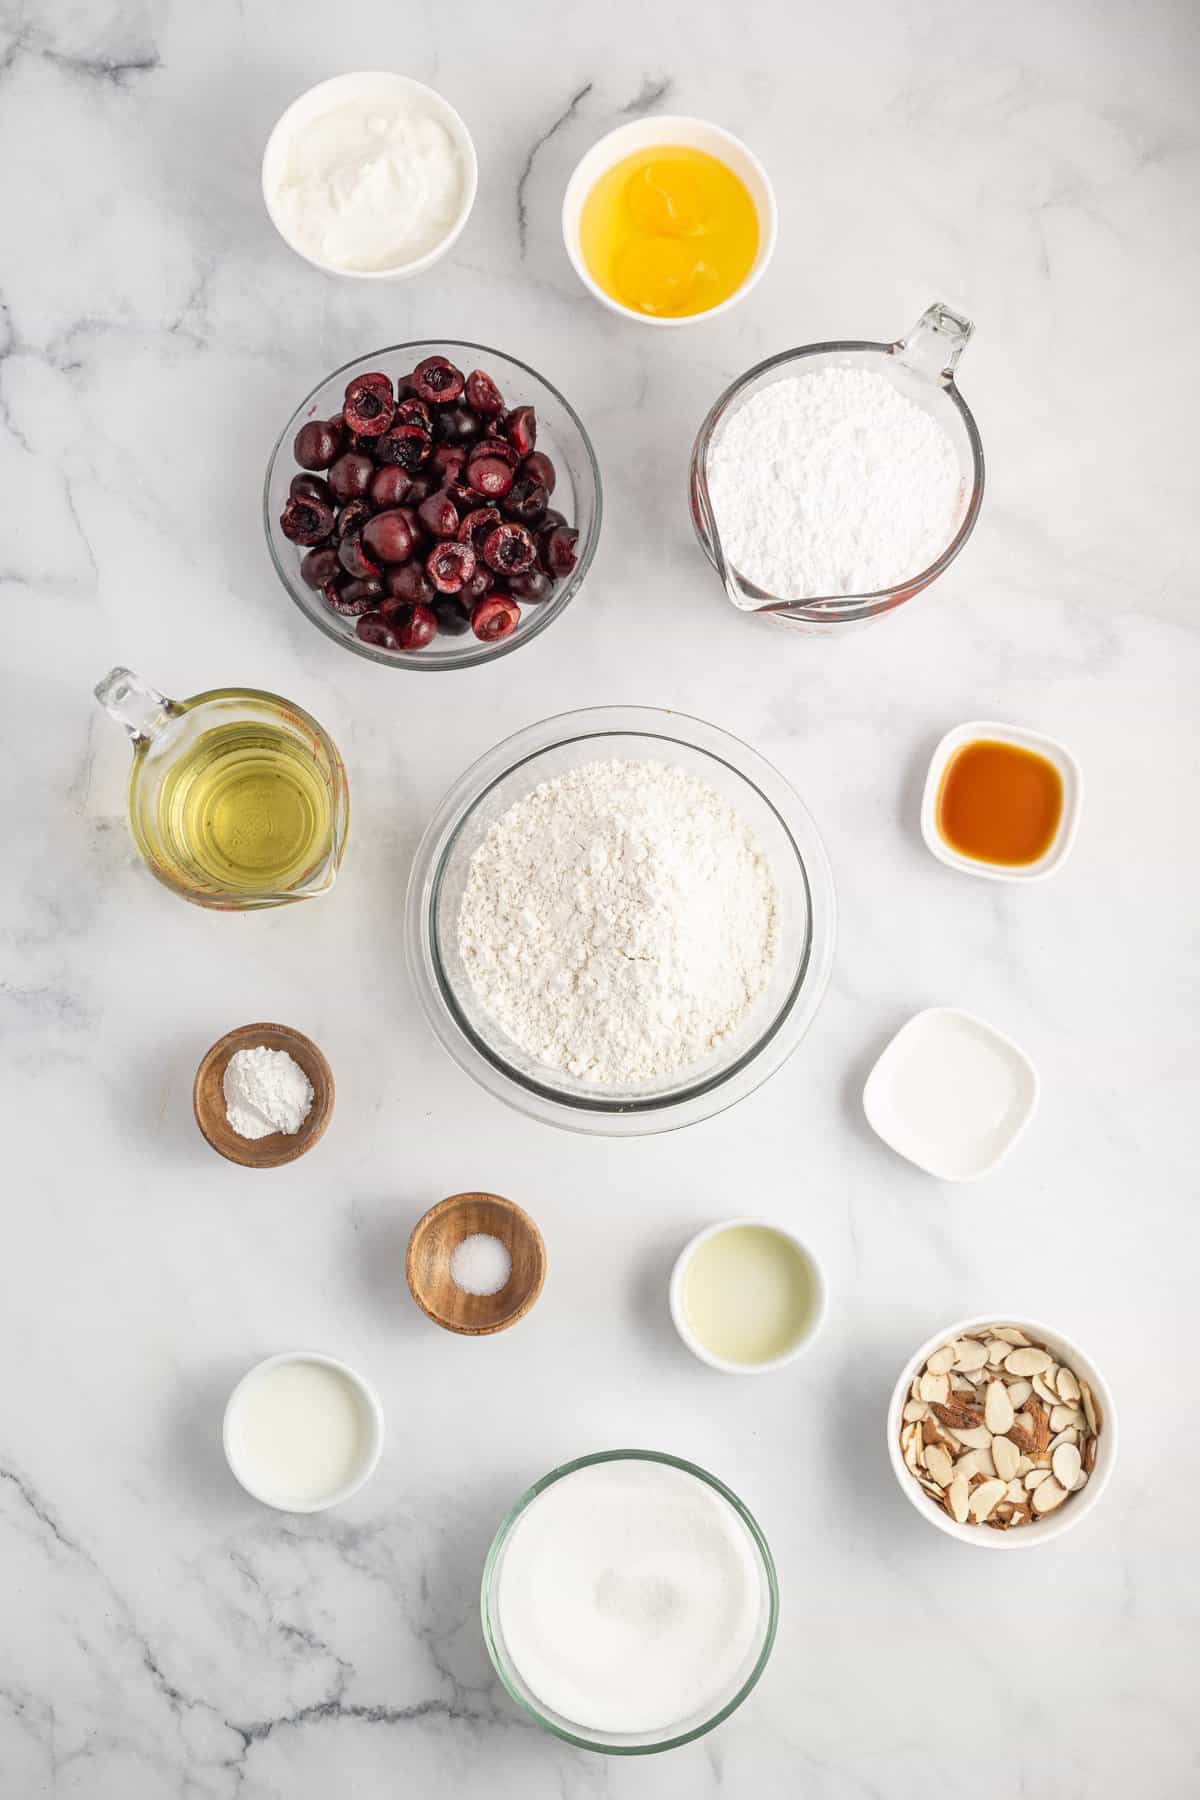 All the ingredients to make cherry bread in little bowls on white background.